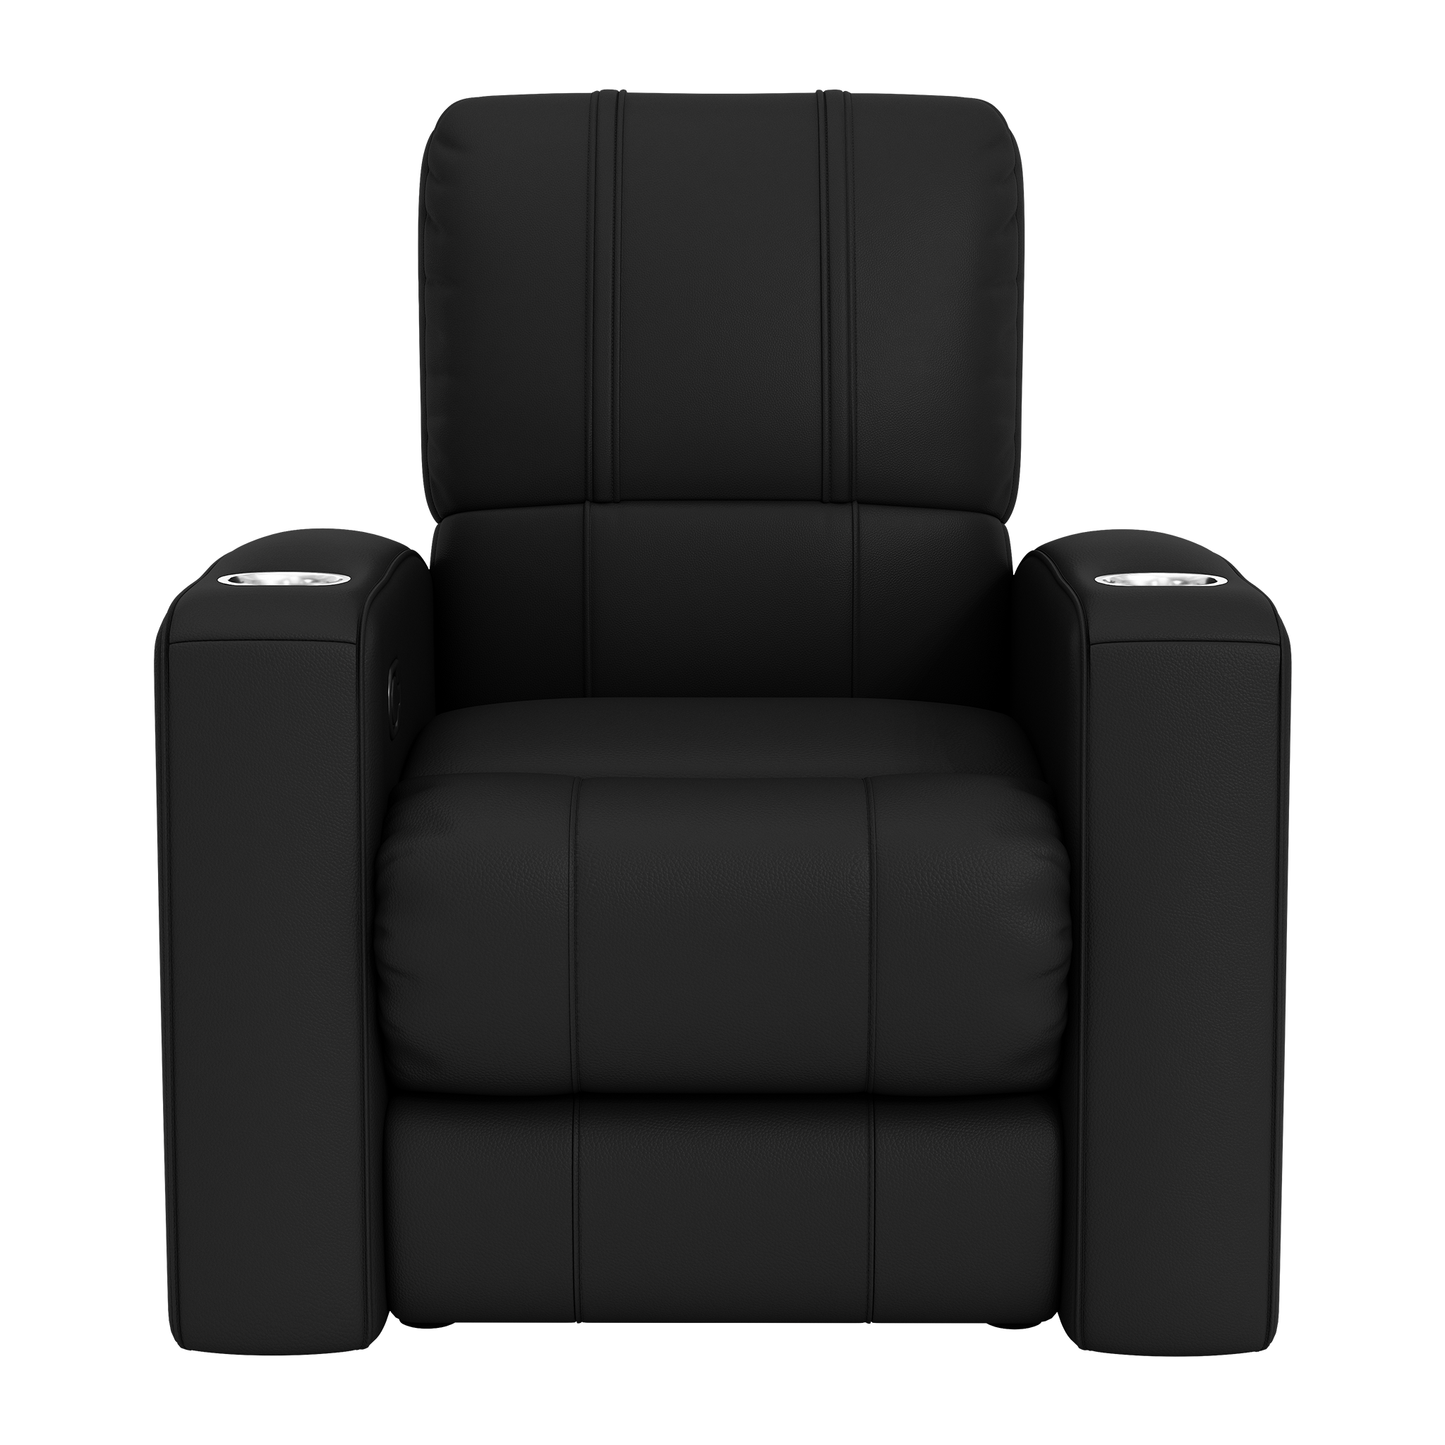 Relax Home Theater Recliner with Los Angeles Dodgers Logo